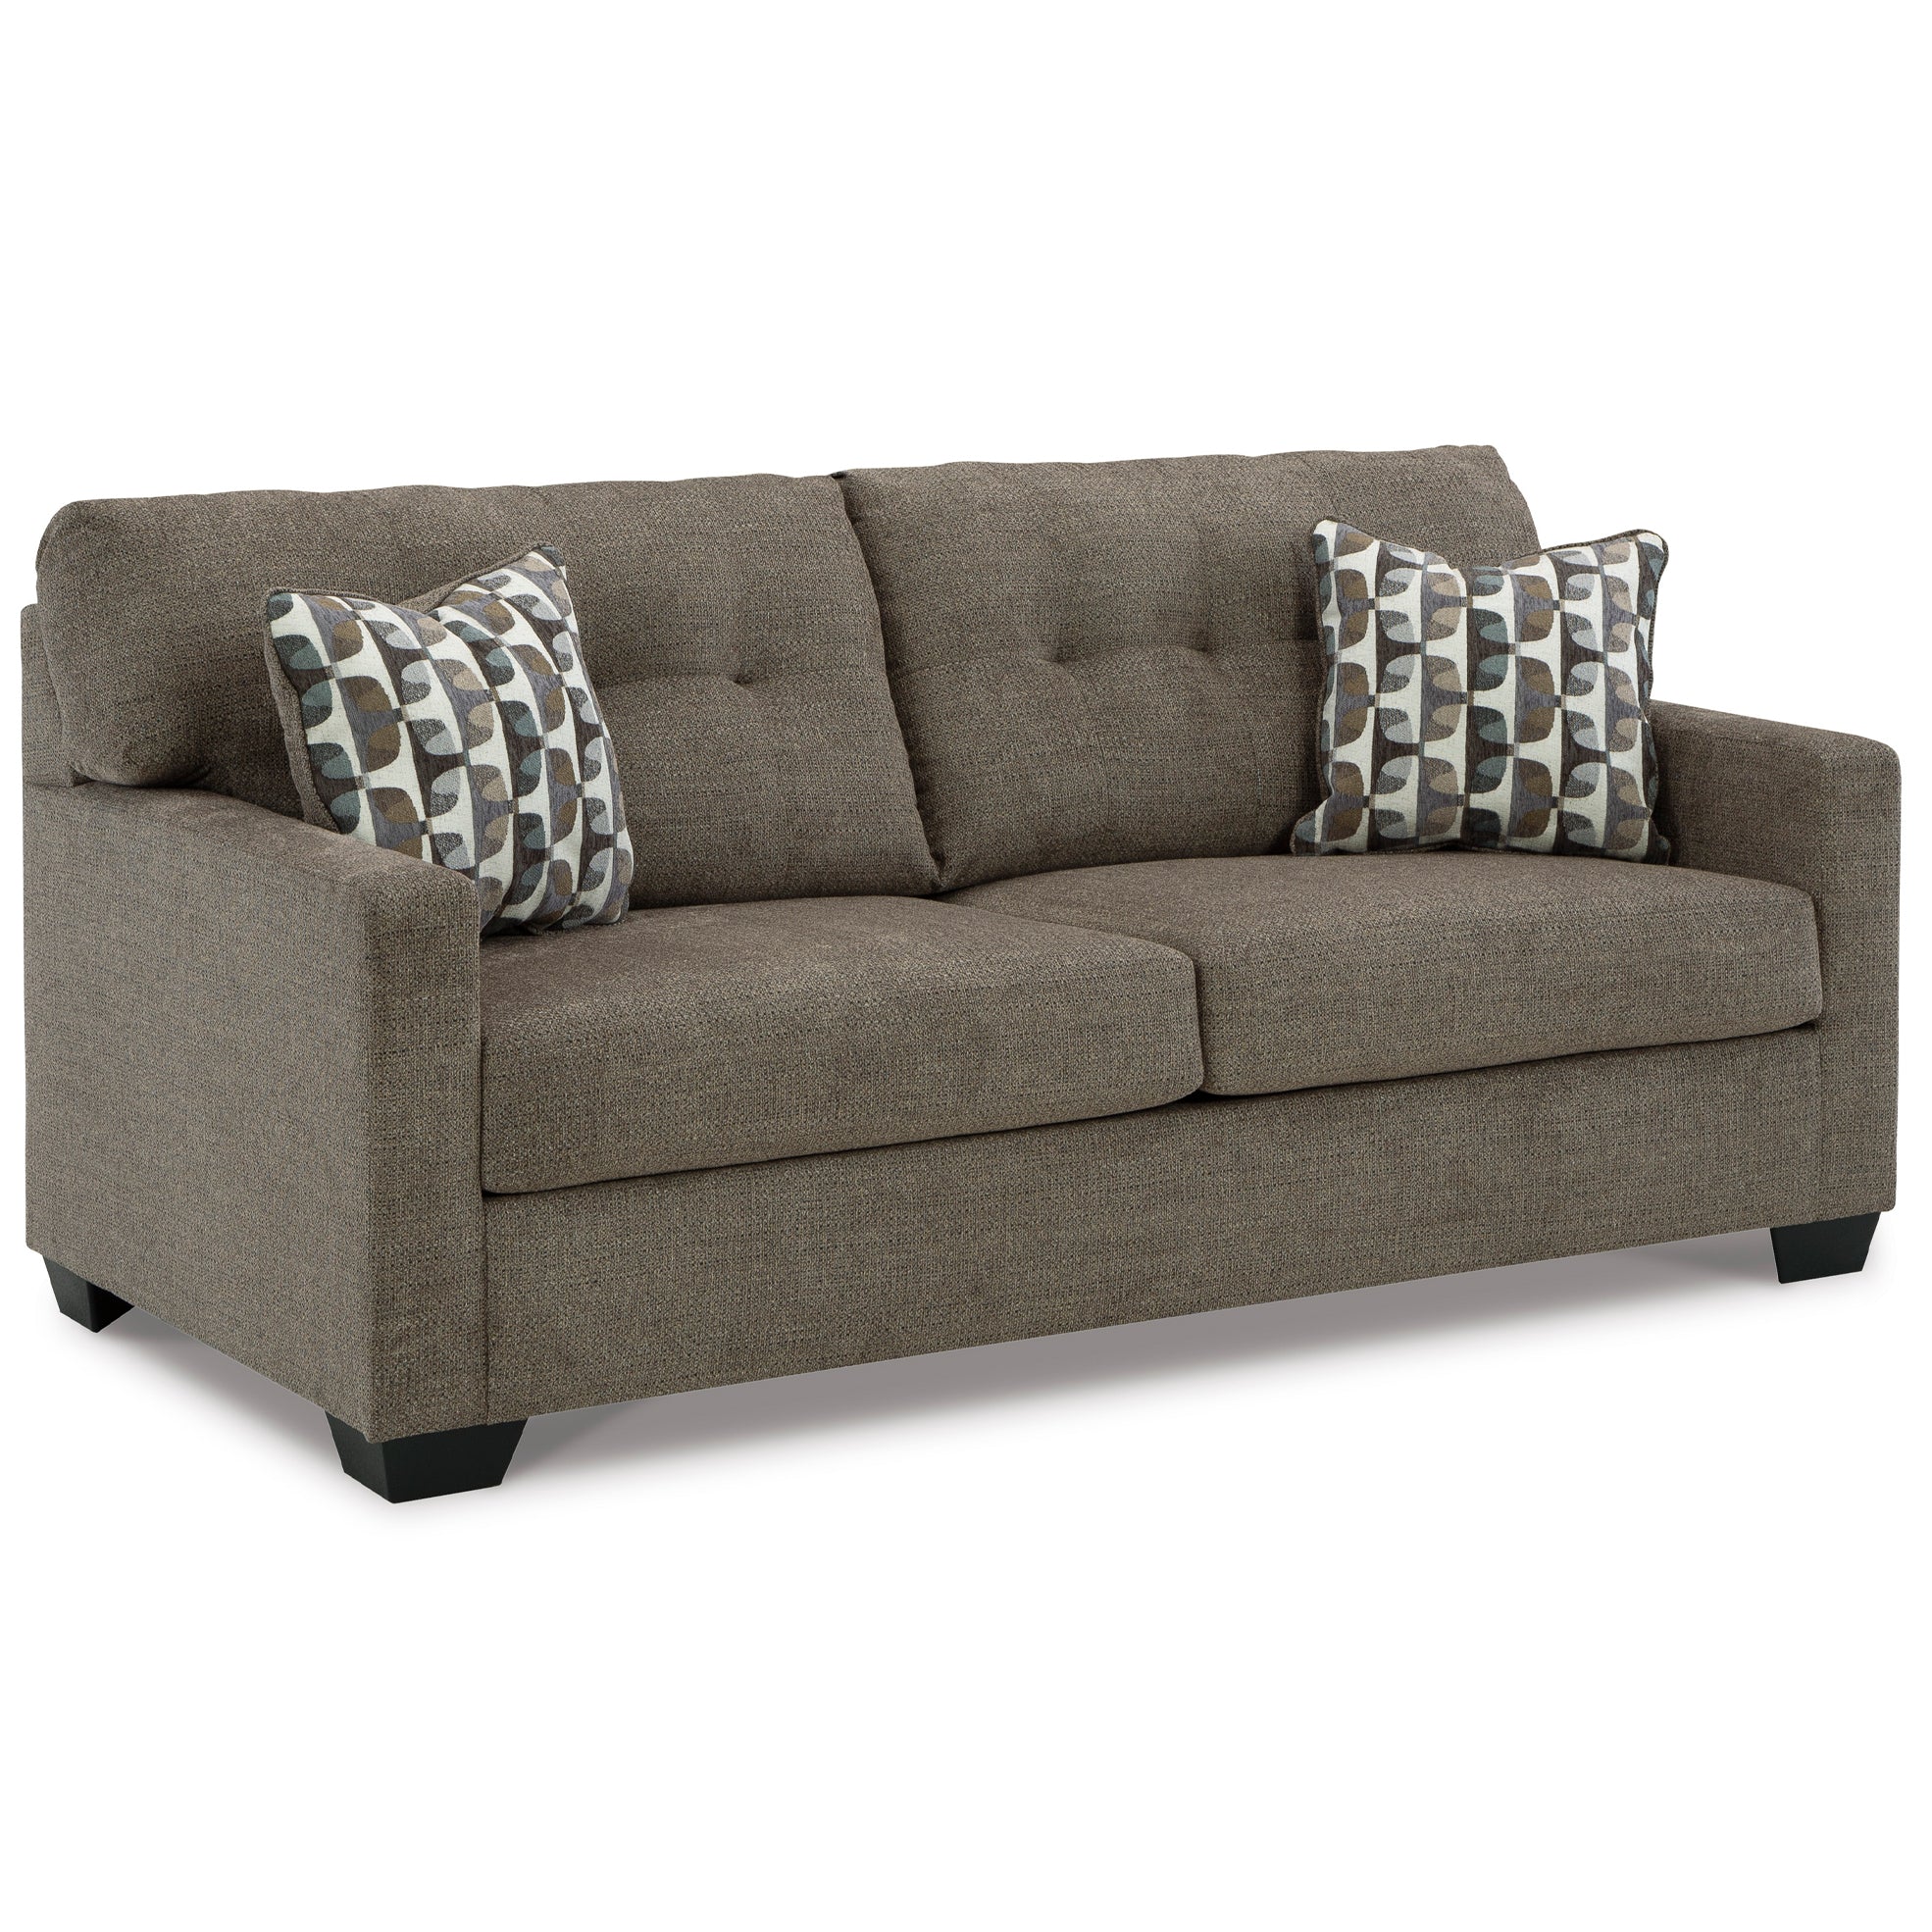 Plush and stylish Mahoney Sofa in chocolate, ideal for both casual lounging and formal settings